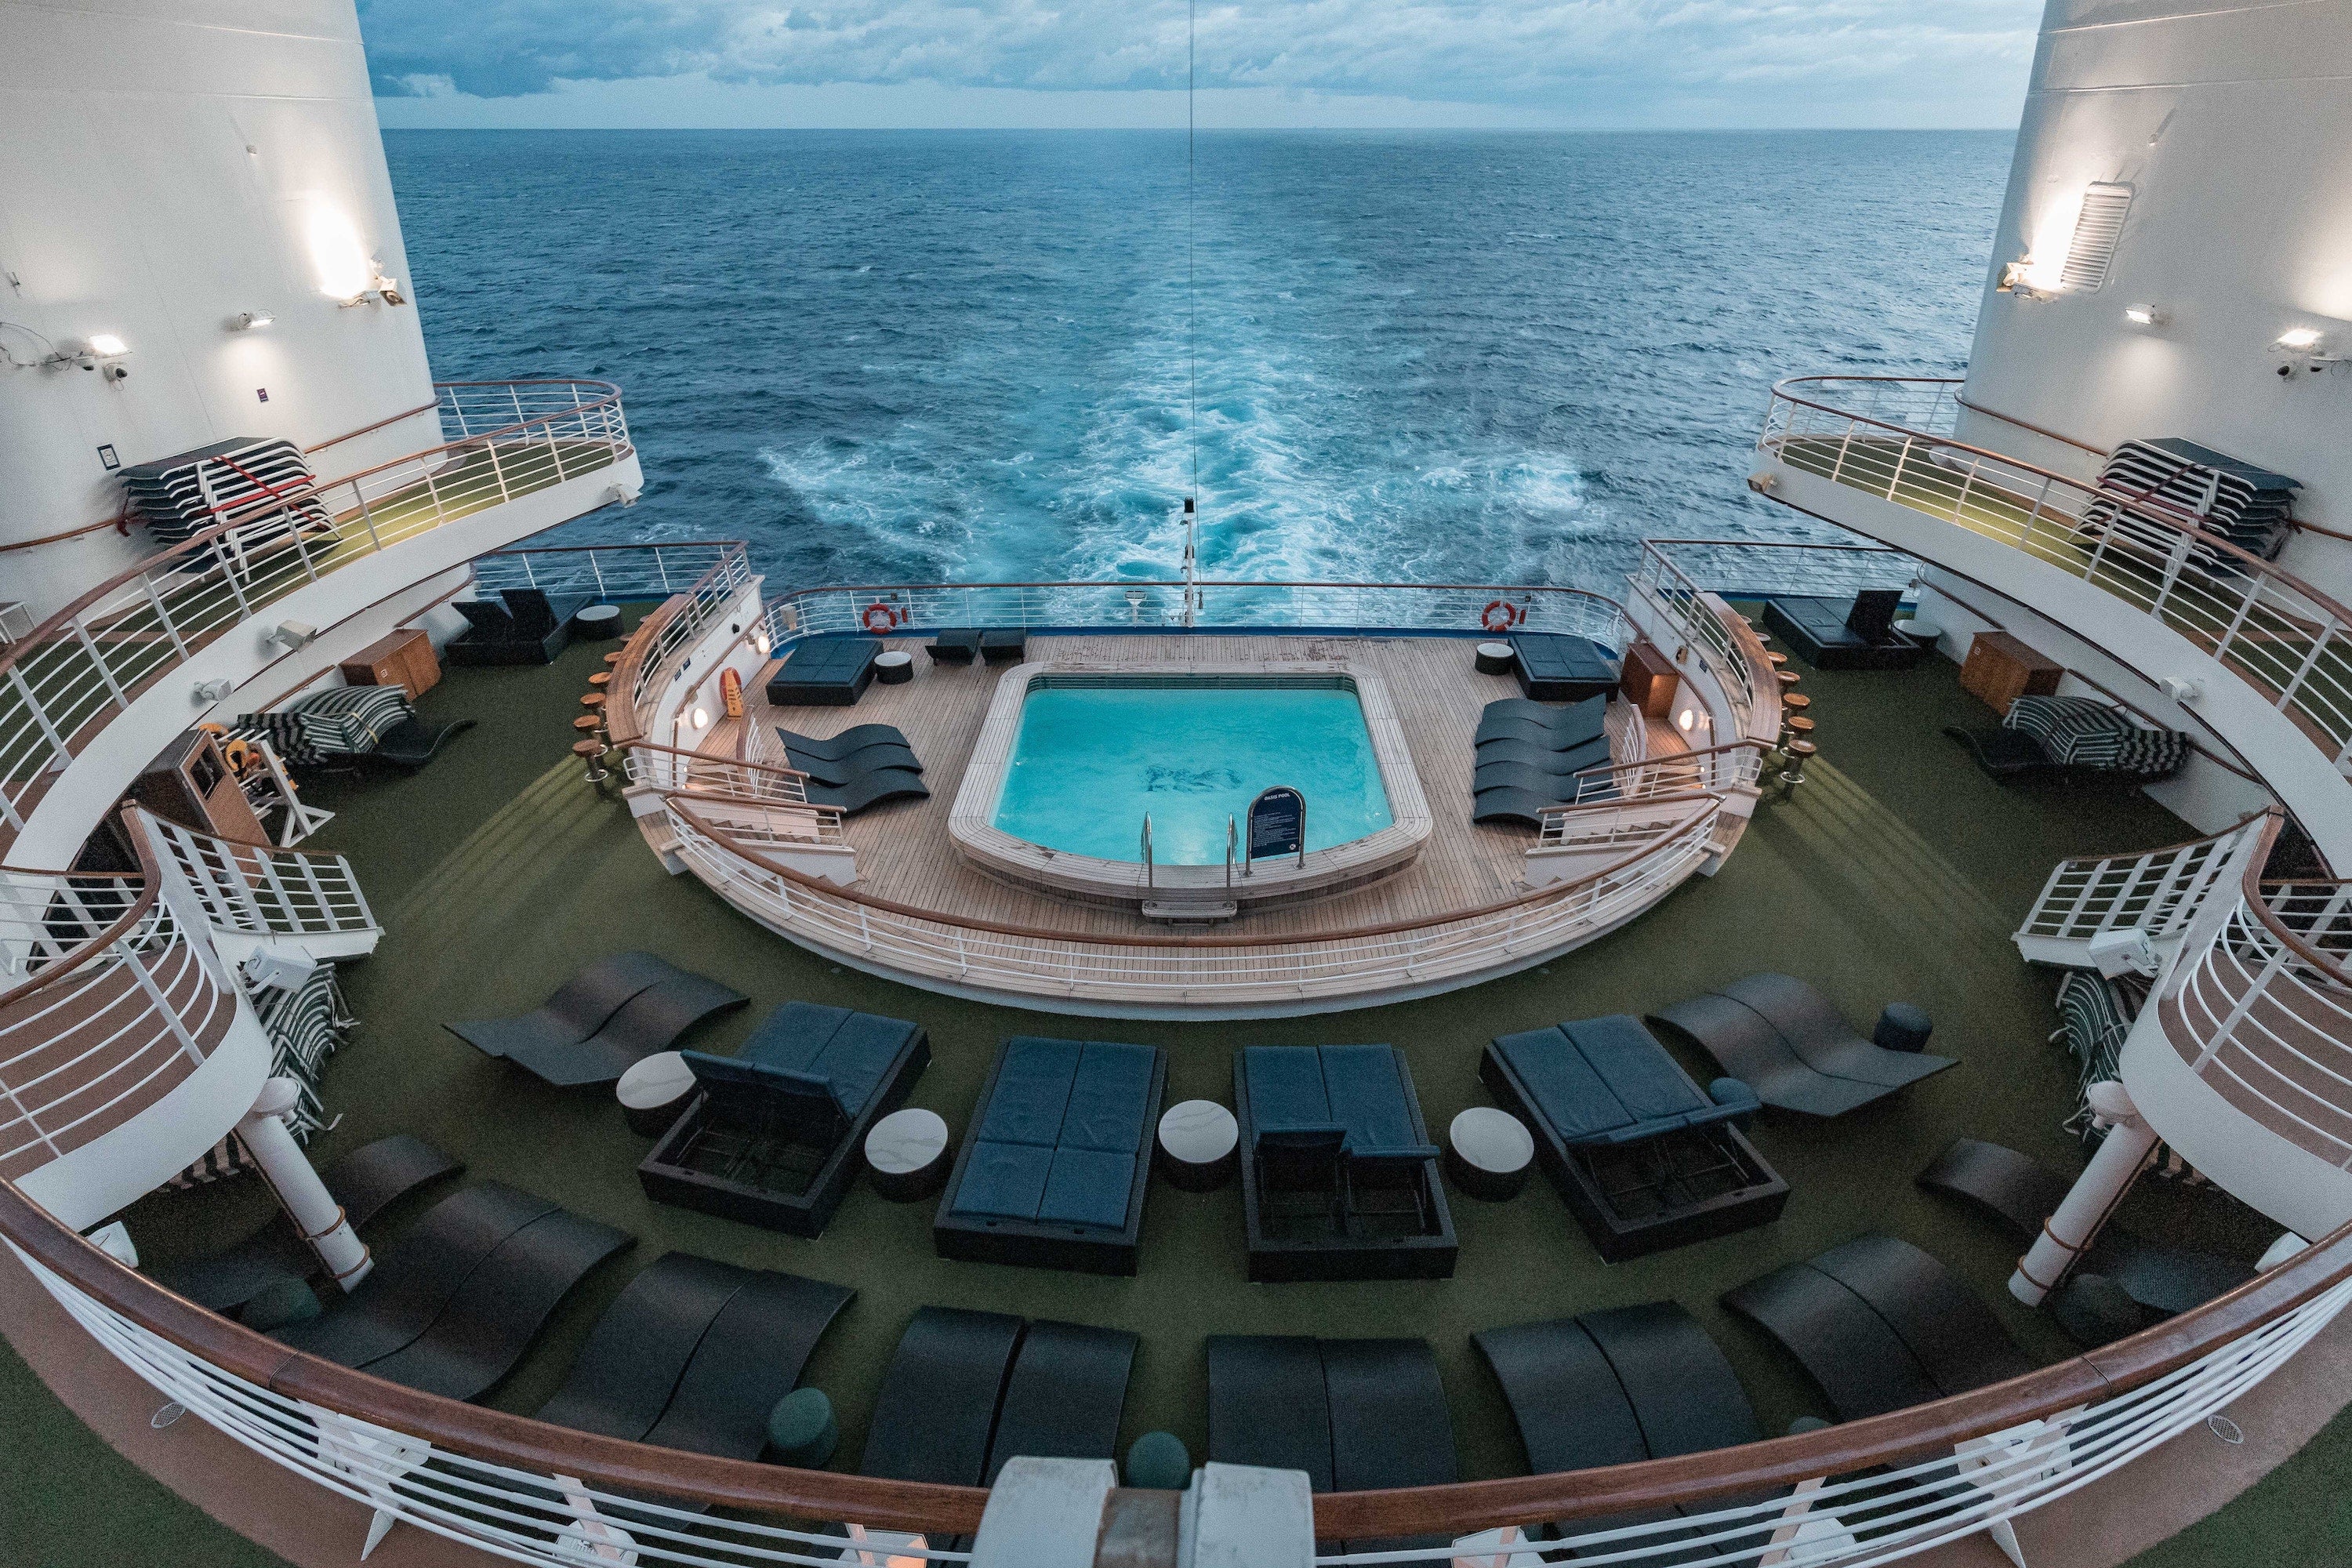 Cruise Vacations: Navigating the High Seas in Style